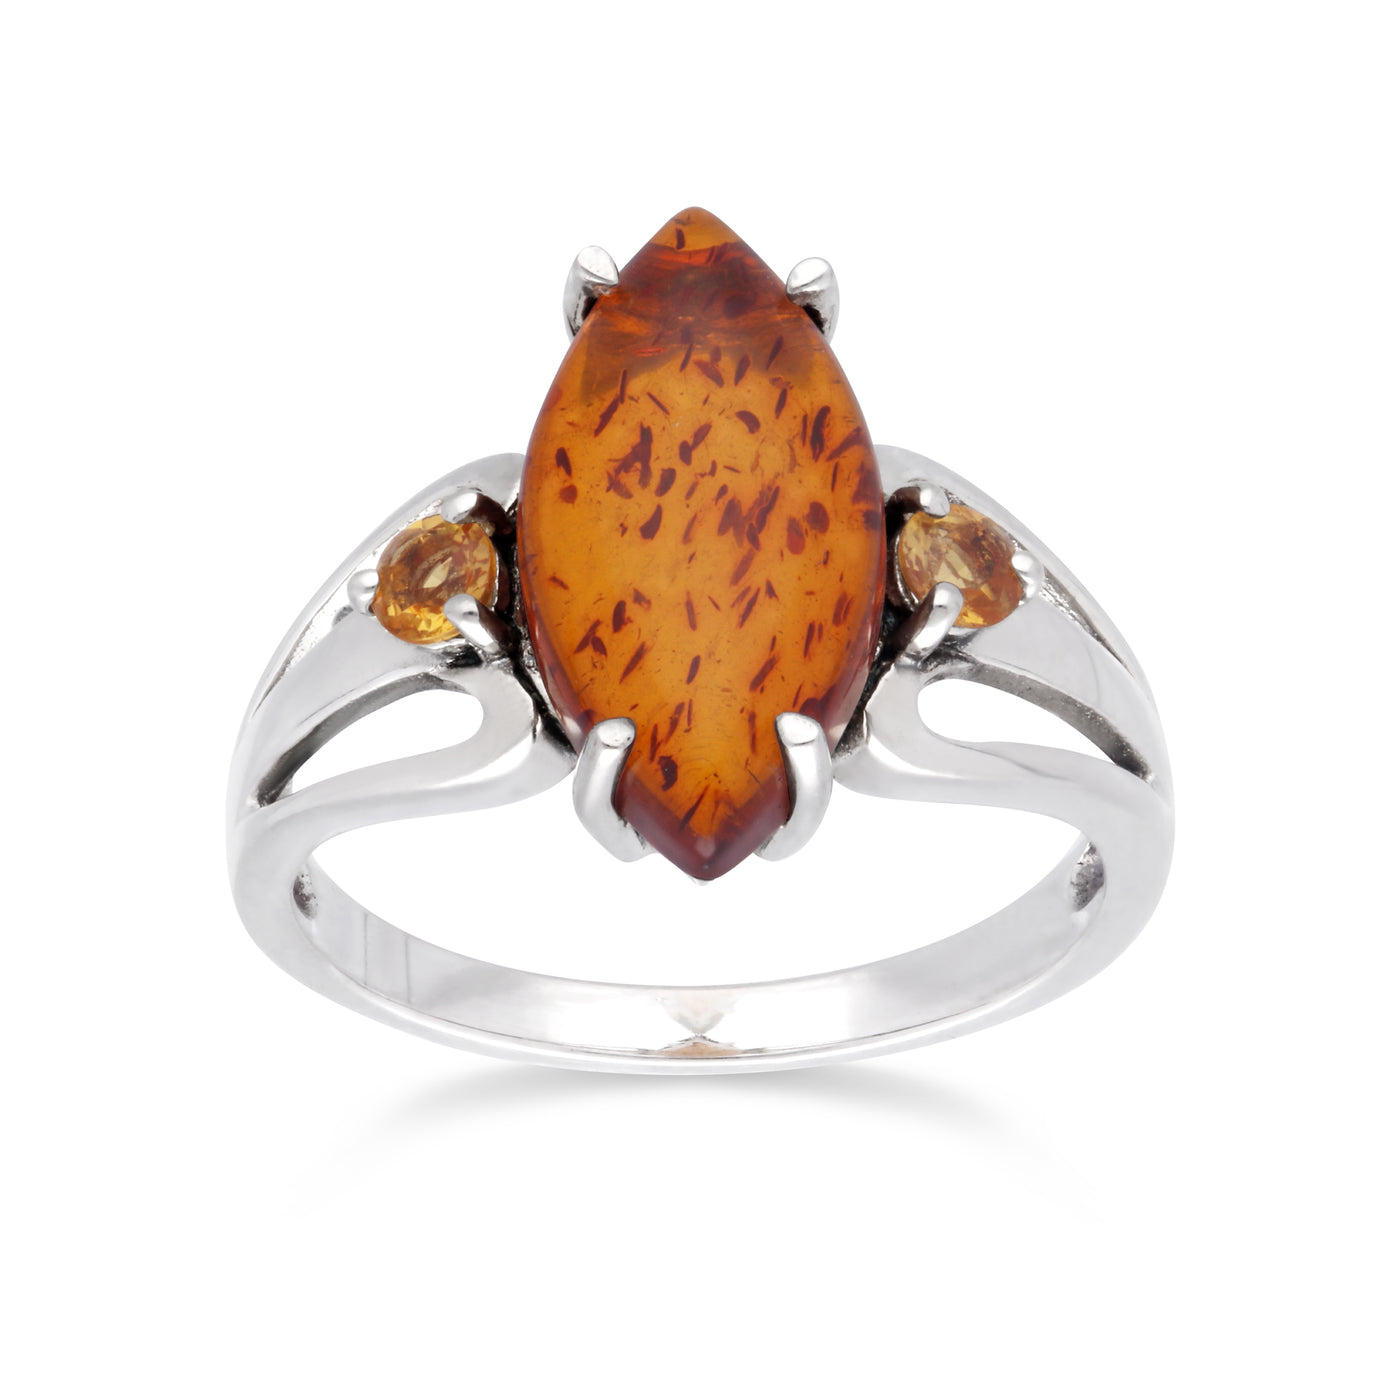 925 Sterling Silver Amber and Citrine Art Nouveau Style Ring